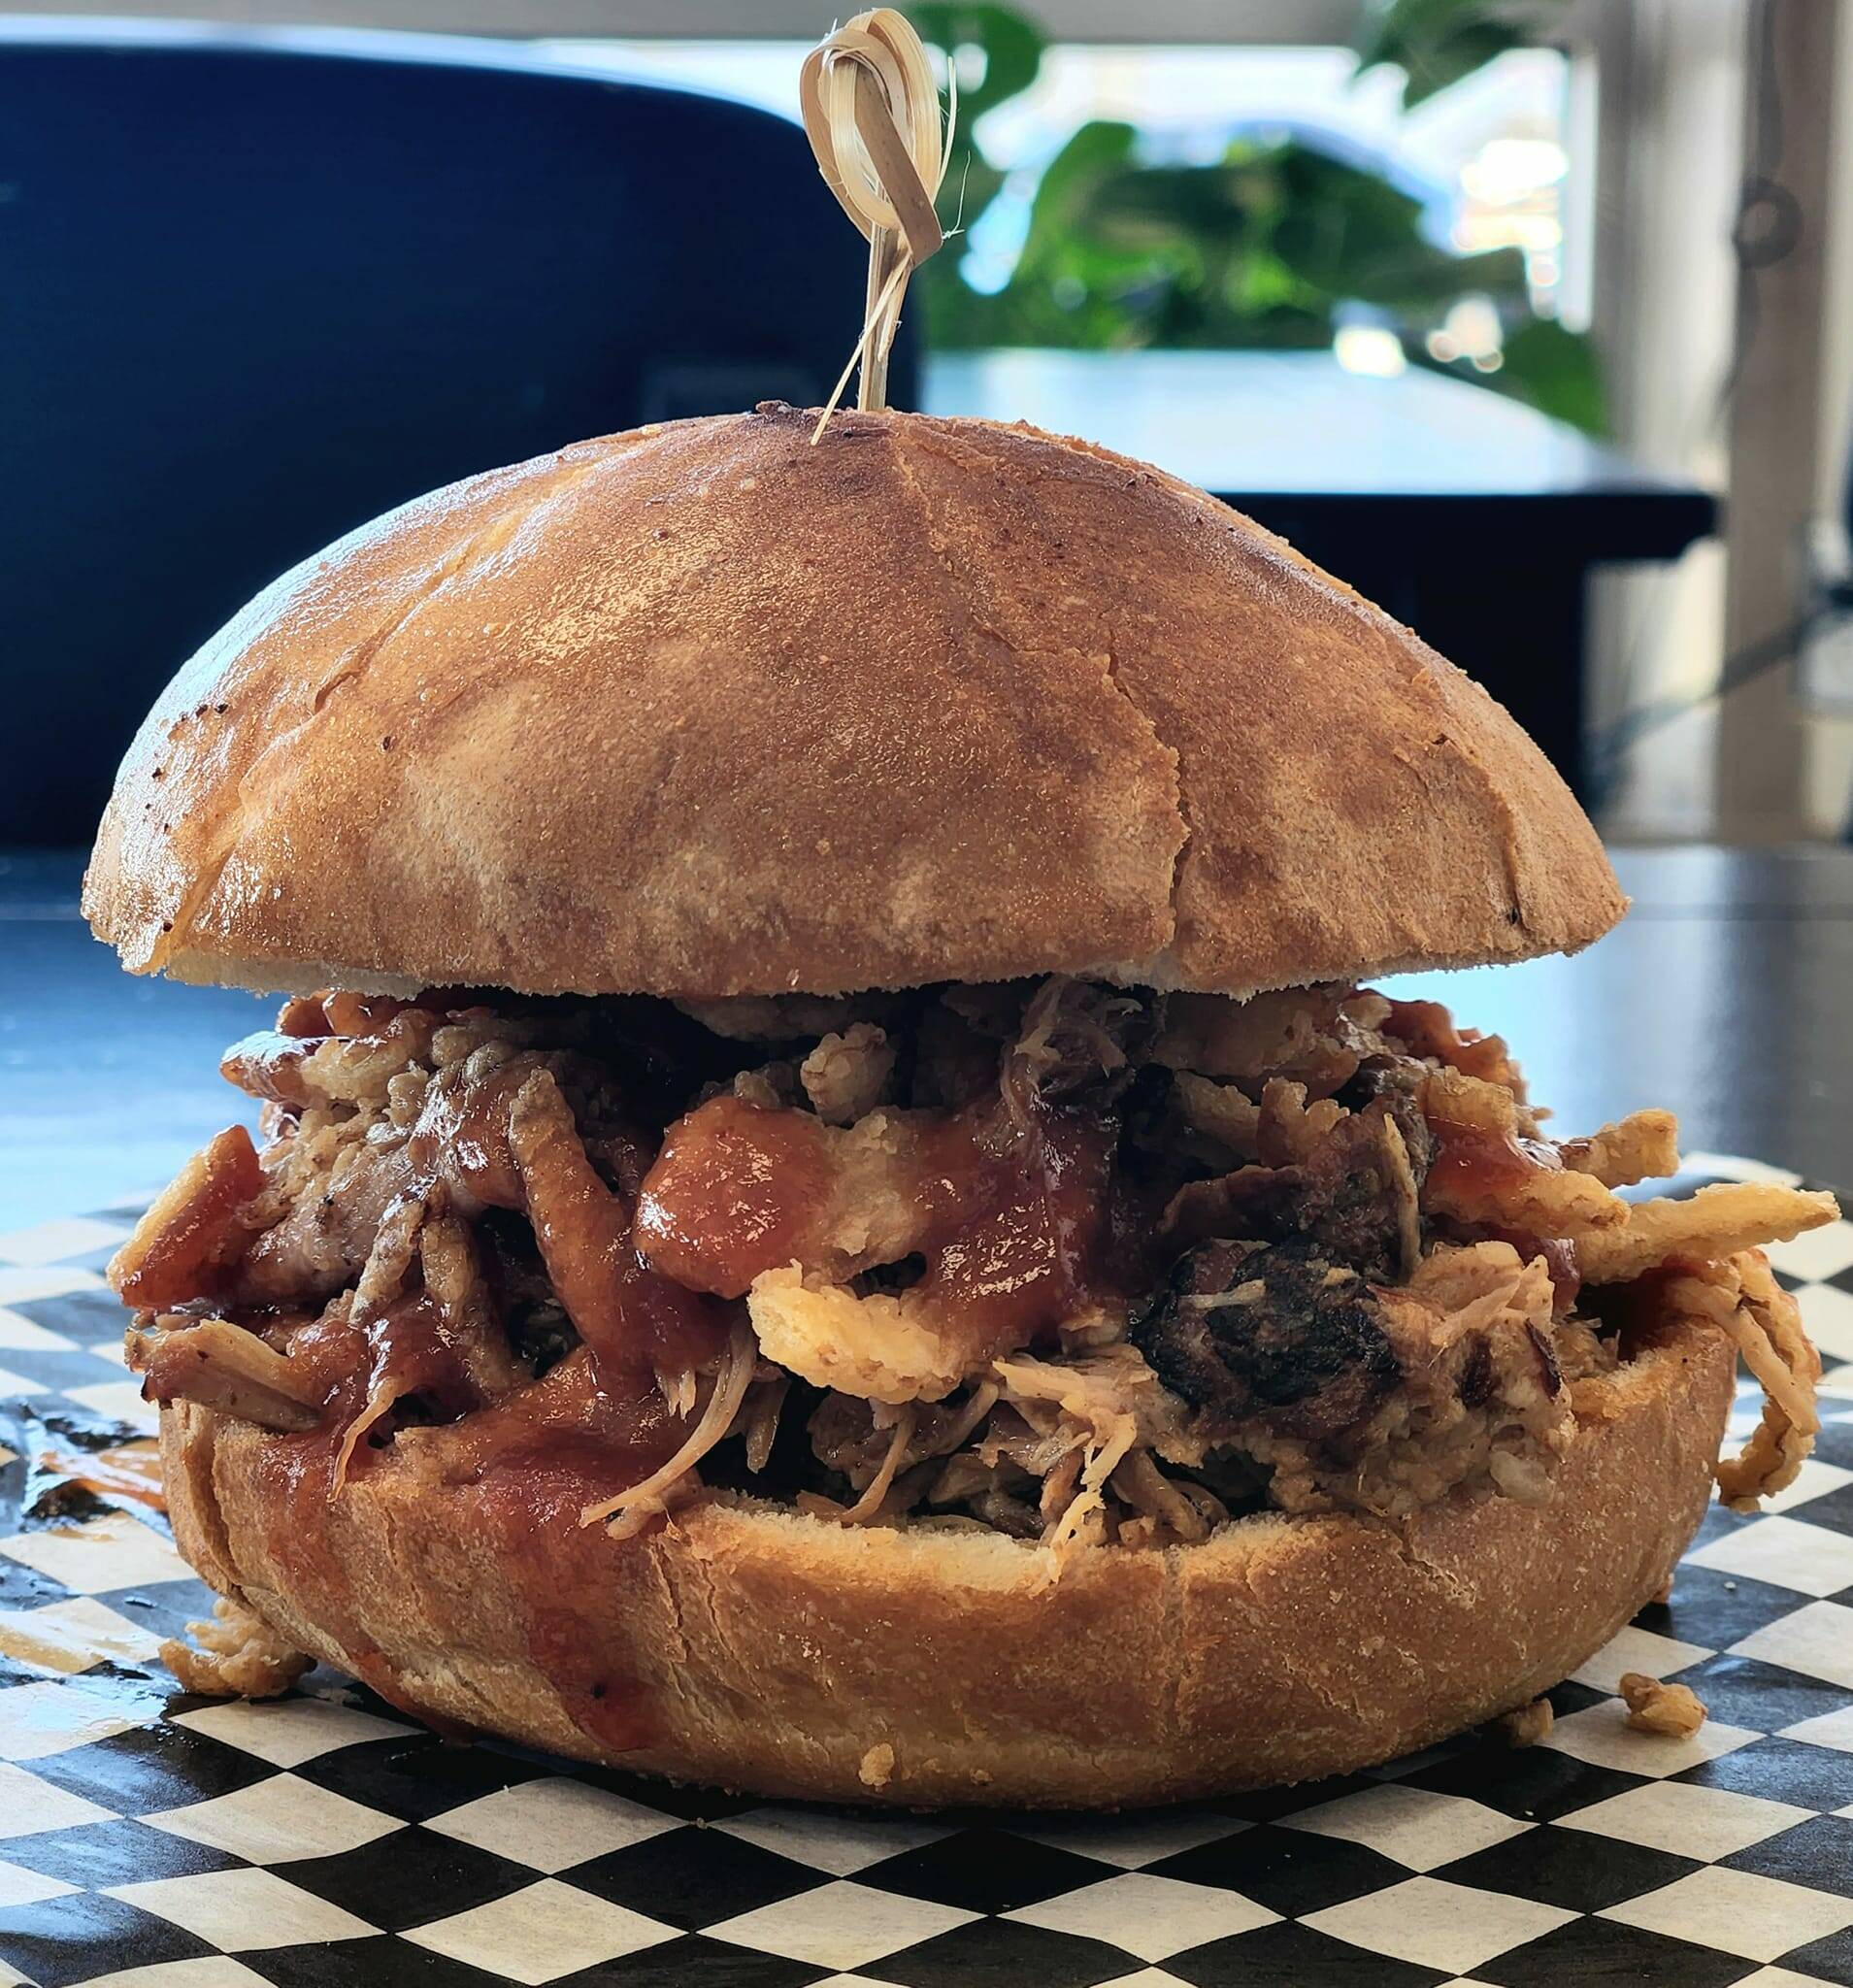 Photo courtesy of Belle’s Black Pot Coffee / An example of the house-smoked meat sandwiches available at Belle’s Black Pot at 131 River Road in Sequim, owned and operated by the Owen family: smoked pork, house sauce, crispy onions on a garlic buttered pub bun.